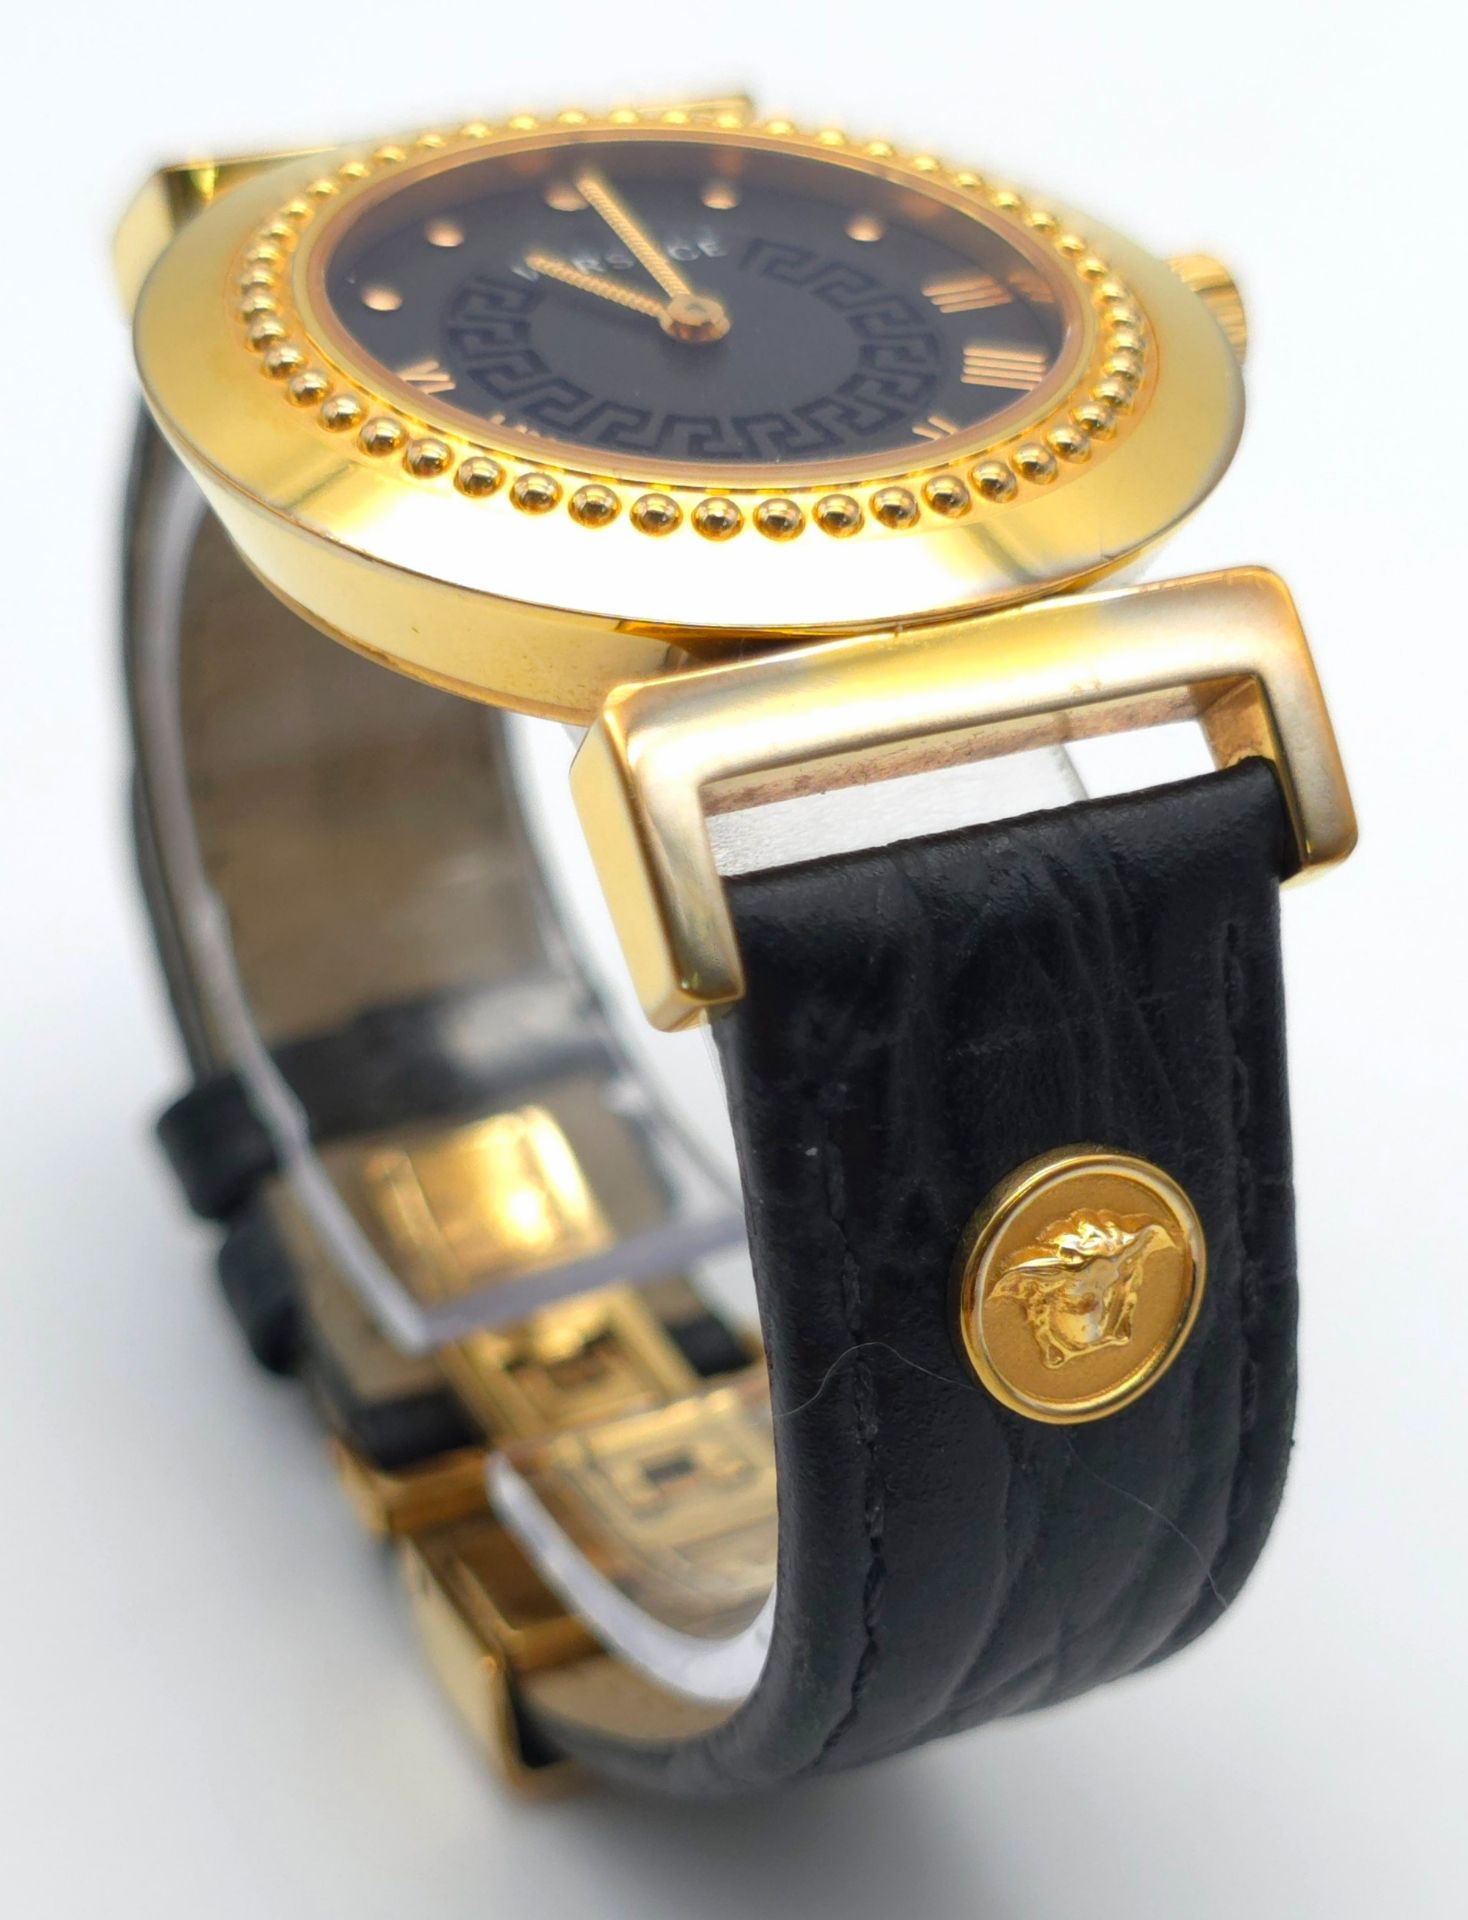 A Versace Designer Quartz Ladies Watch. Black leather and gilded strap and case - 35mm. Black dial - Image 6 of 8